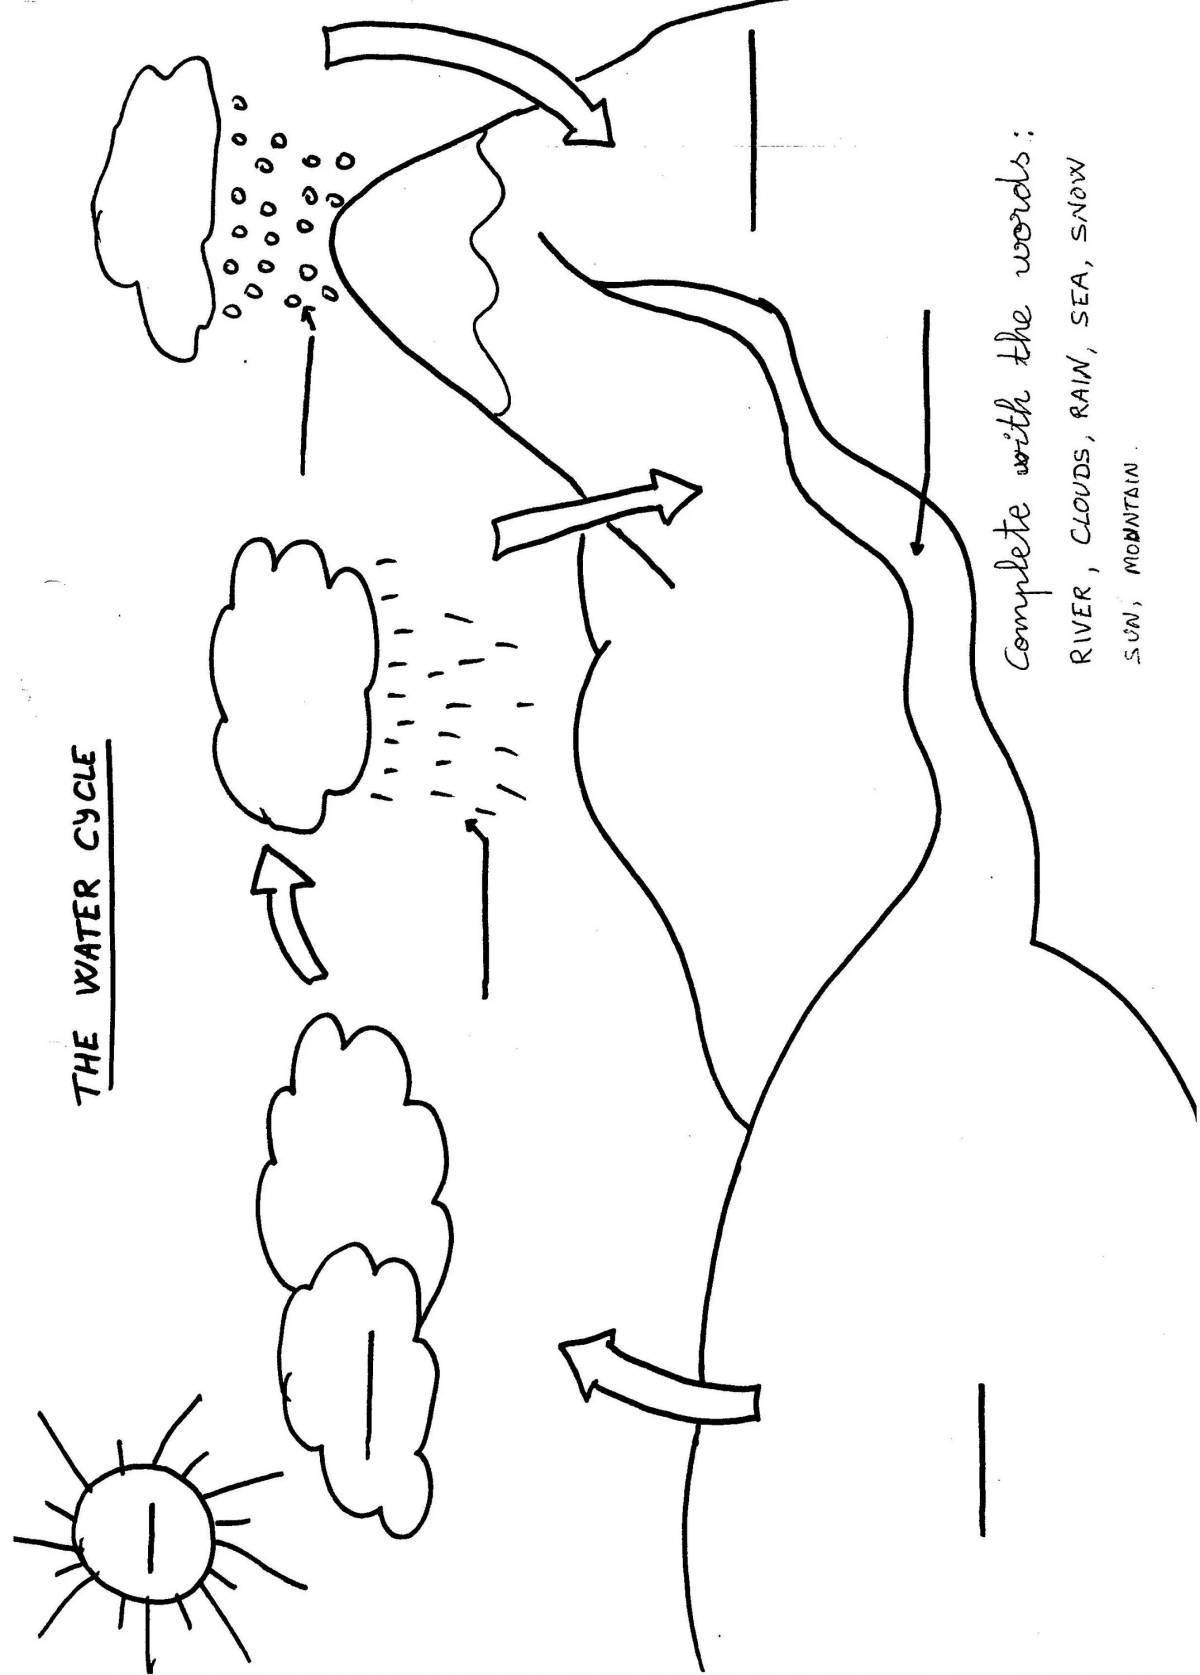 Playful water cycle coloring page